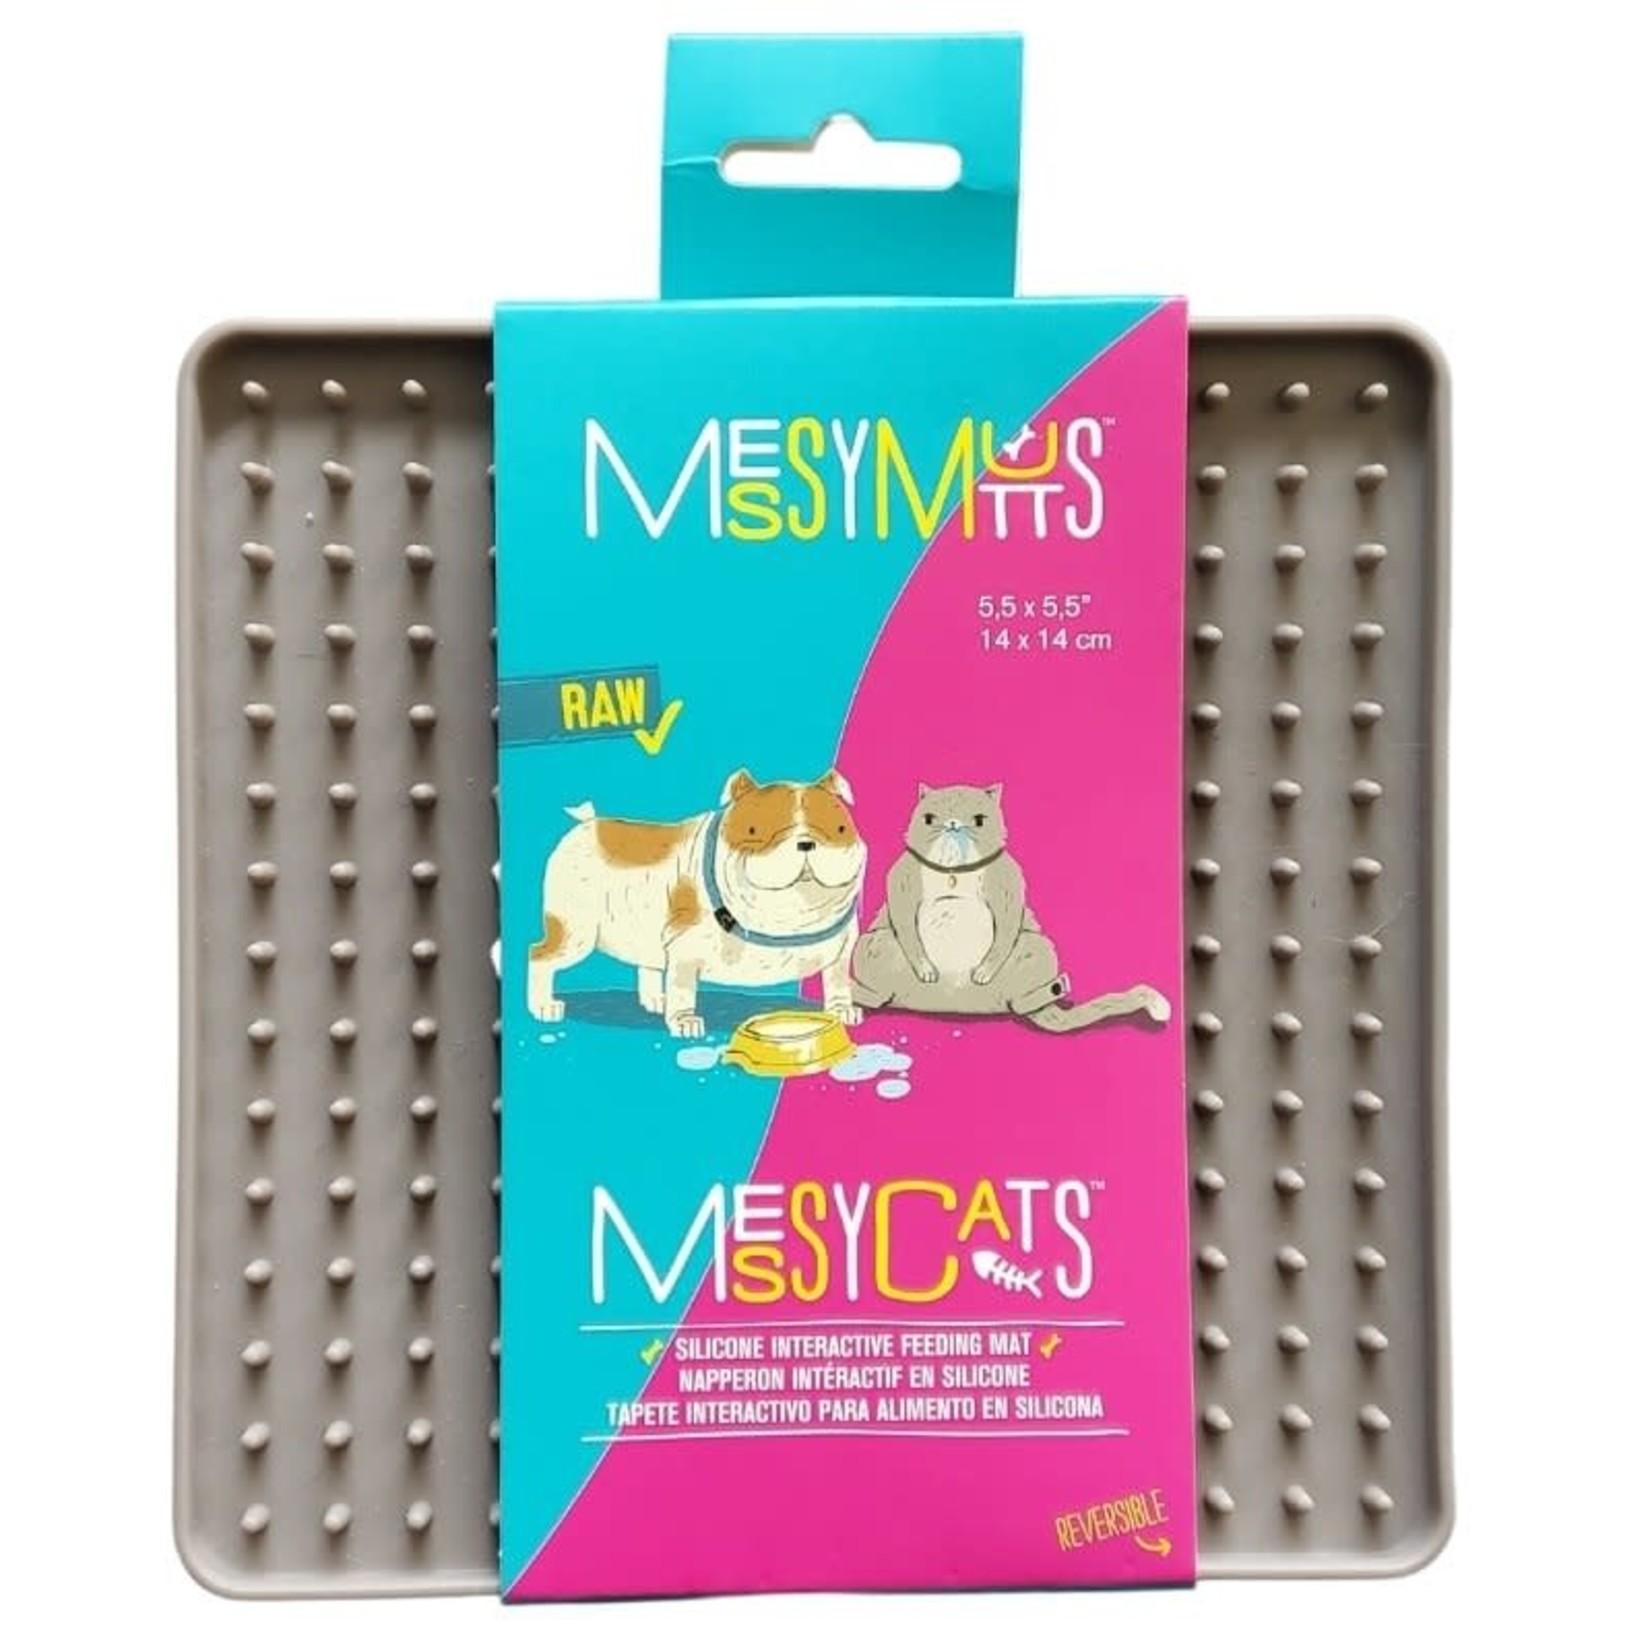 Messy Cats Messy Cats: Silicone Reversible Interactive Feeding Mat